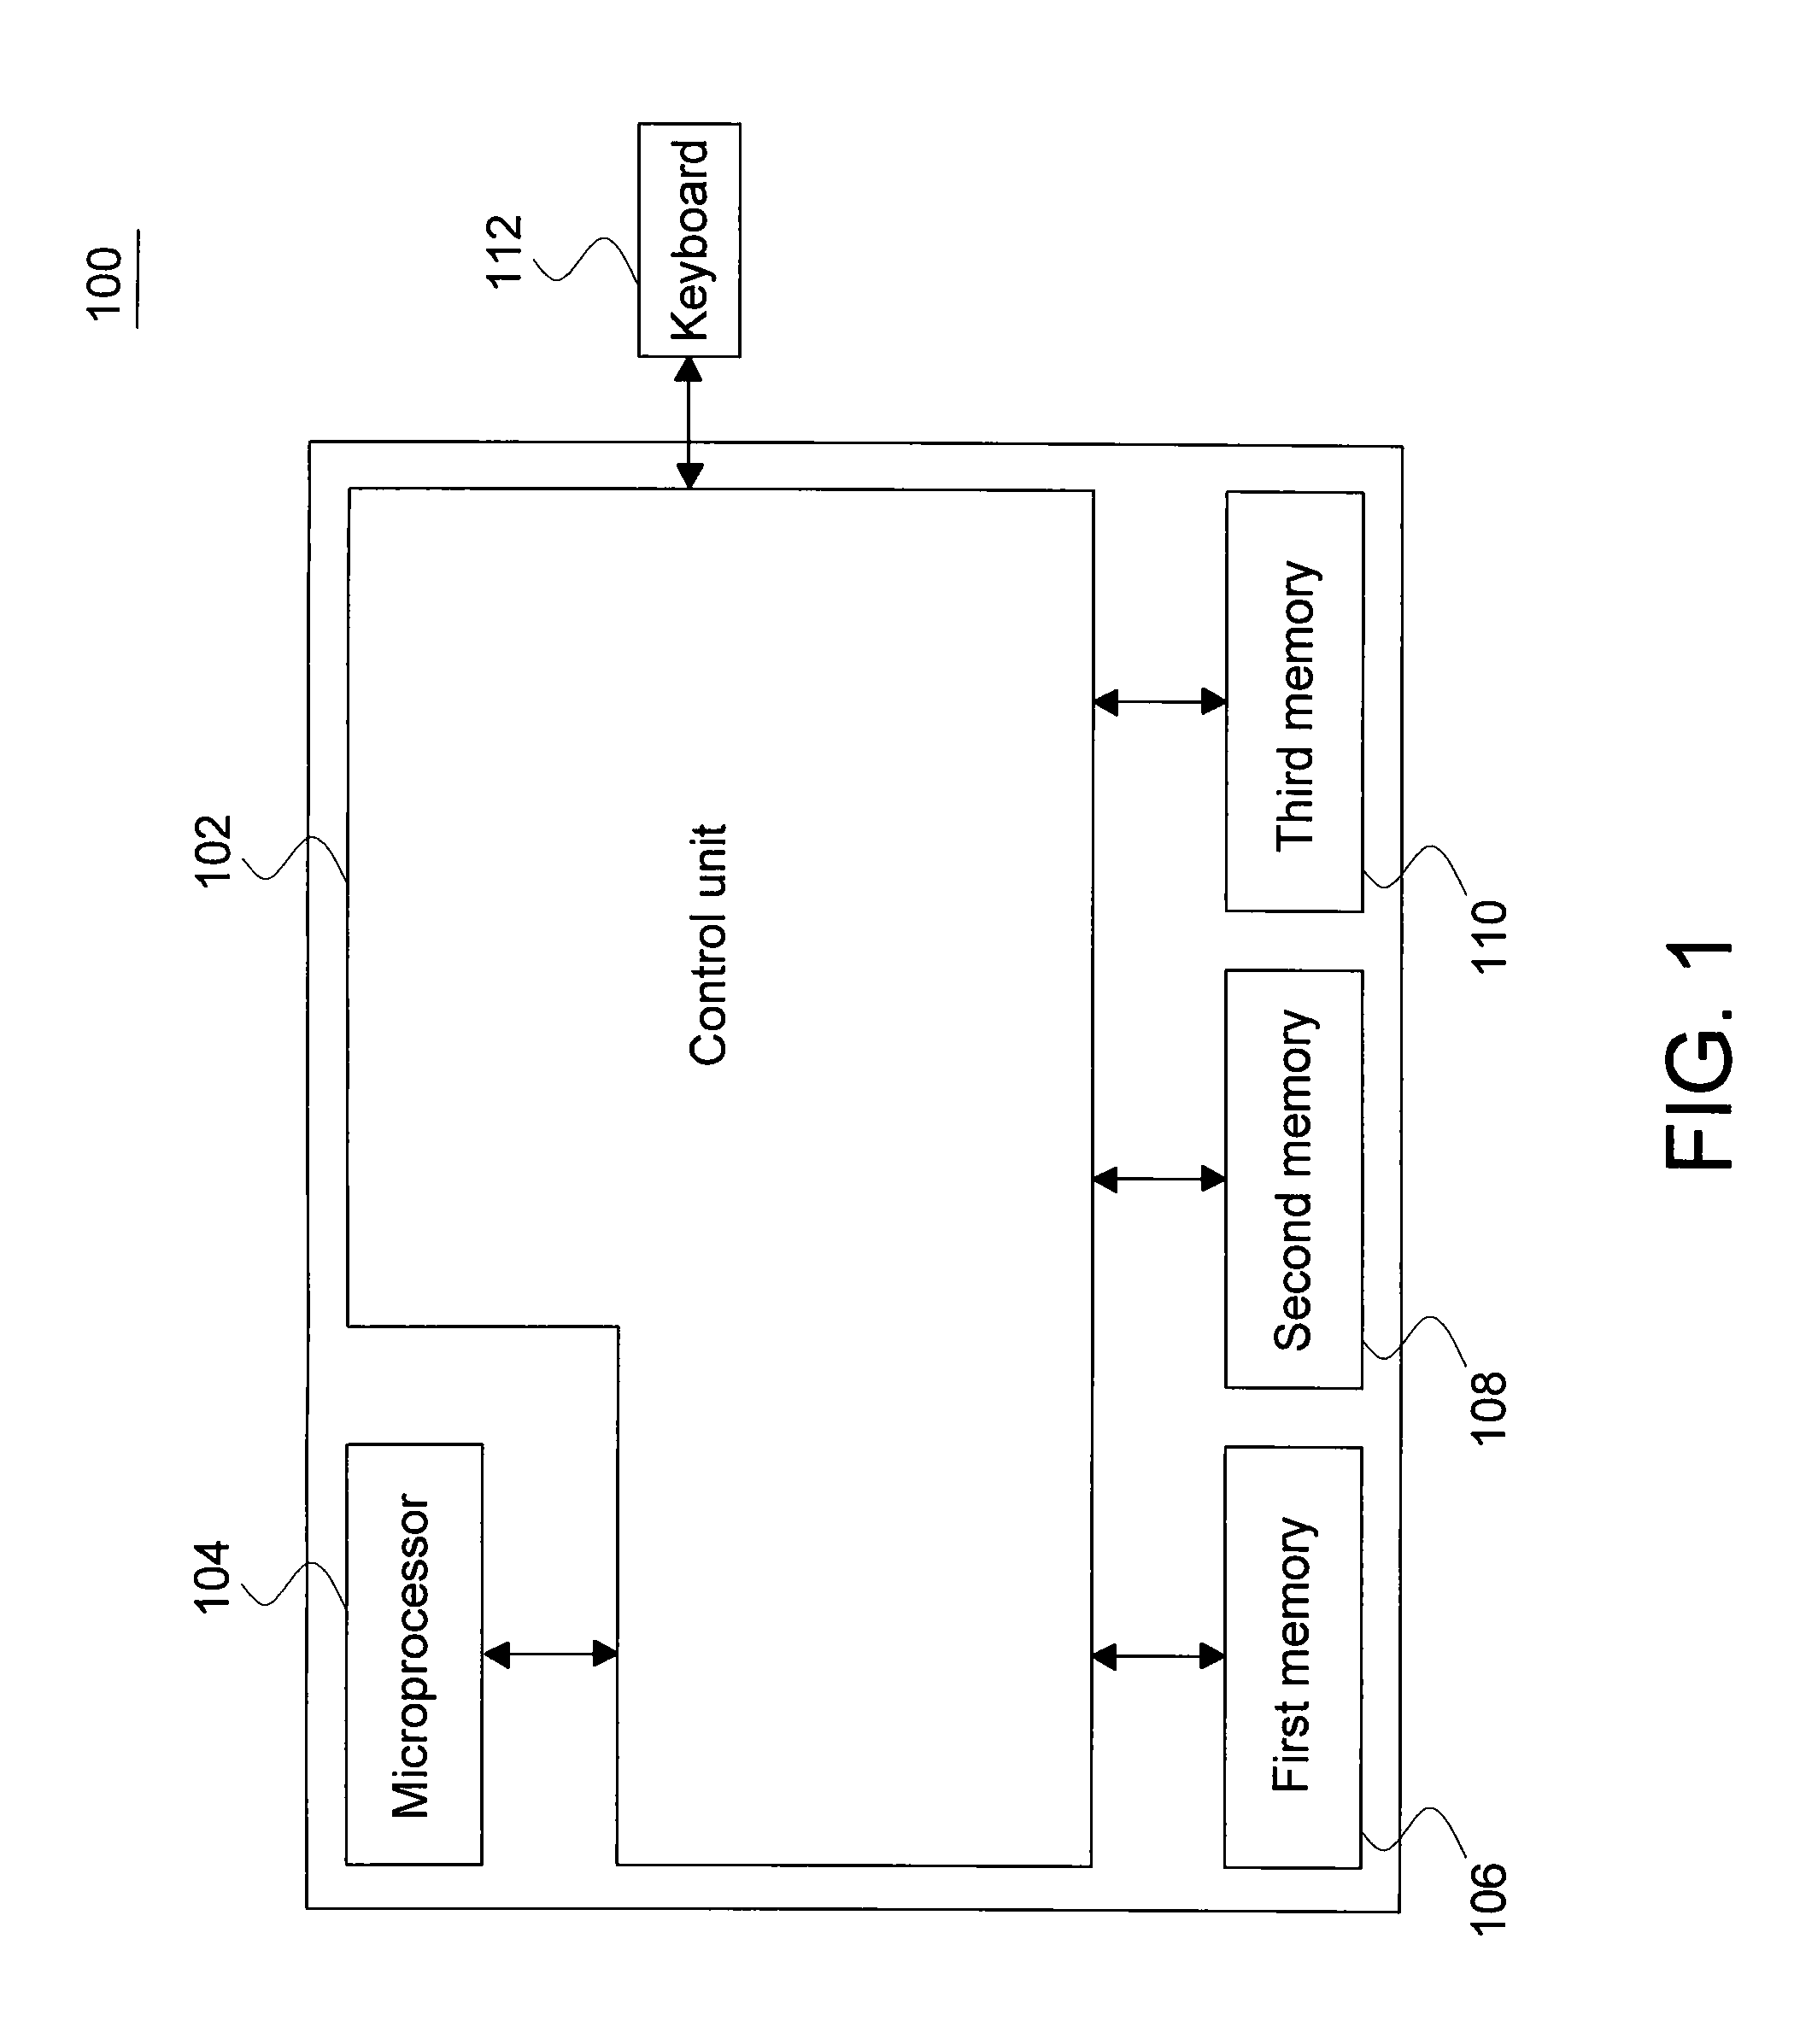 Method and apparatus for changing BIOS parameters via a hot key